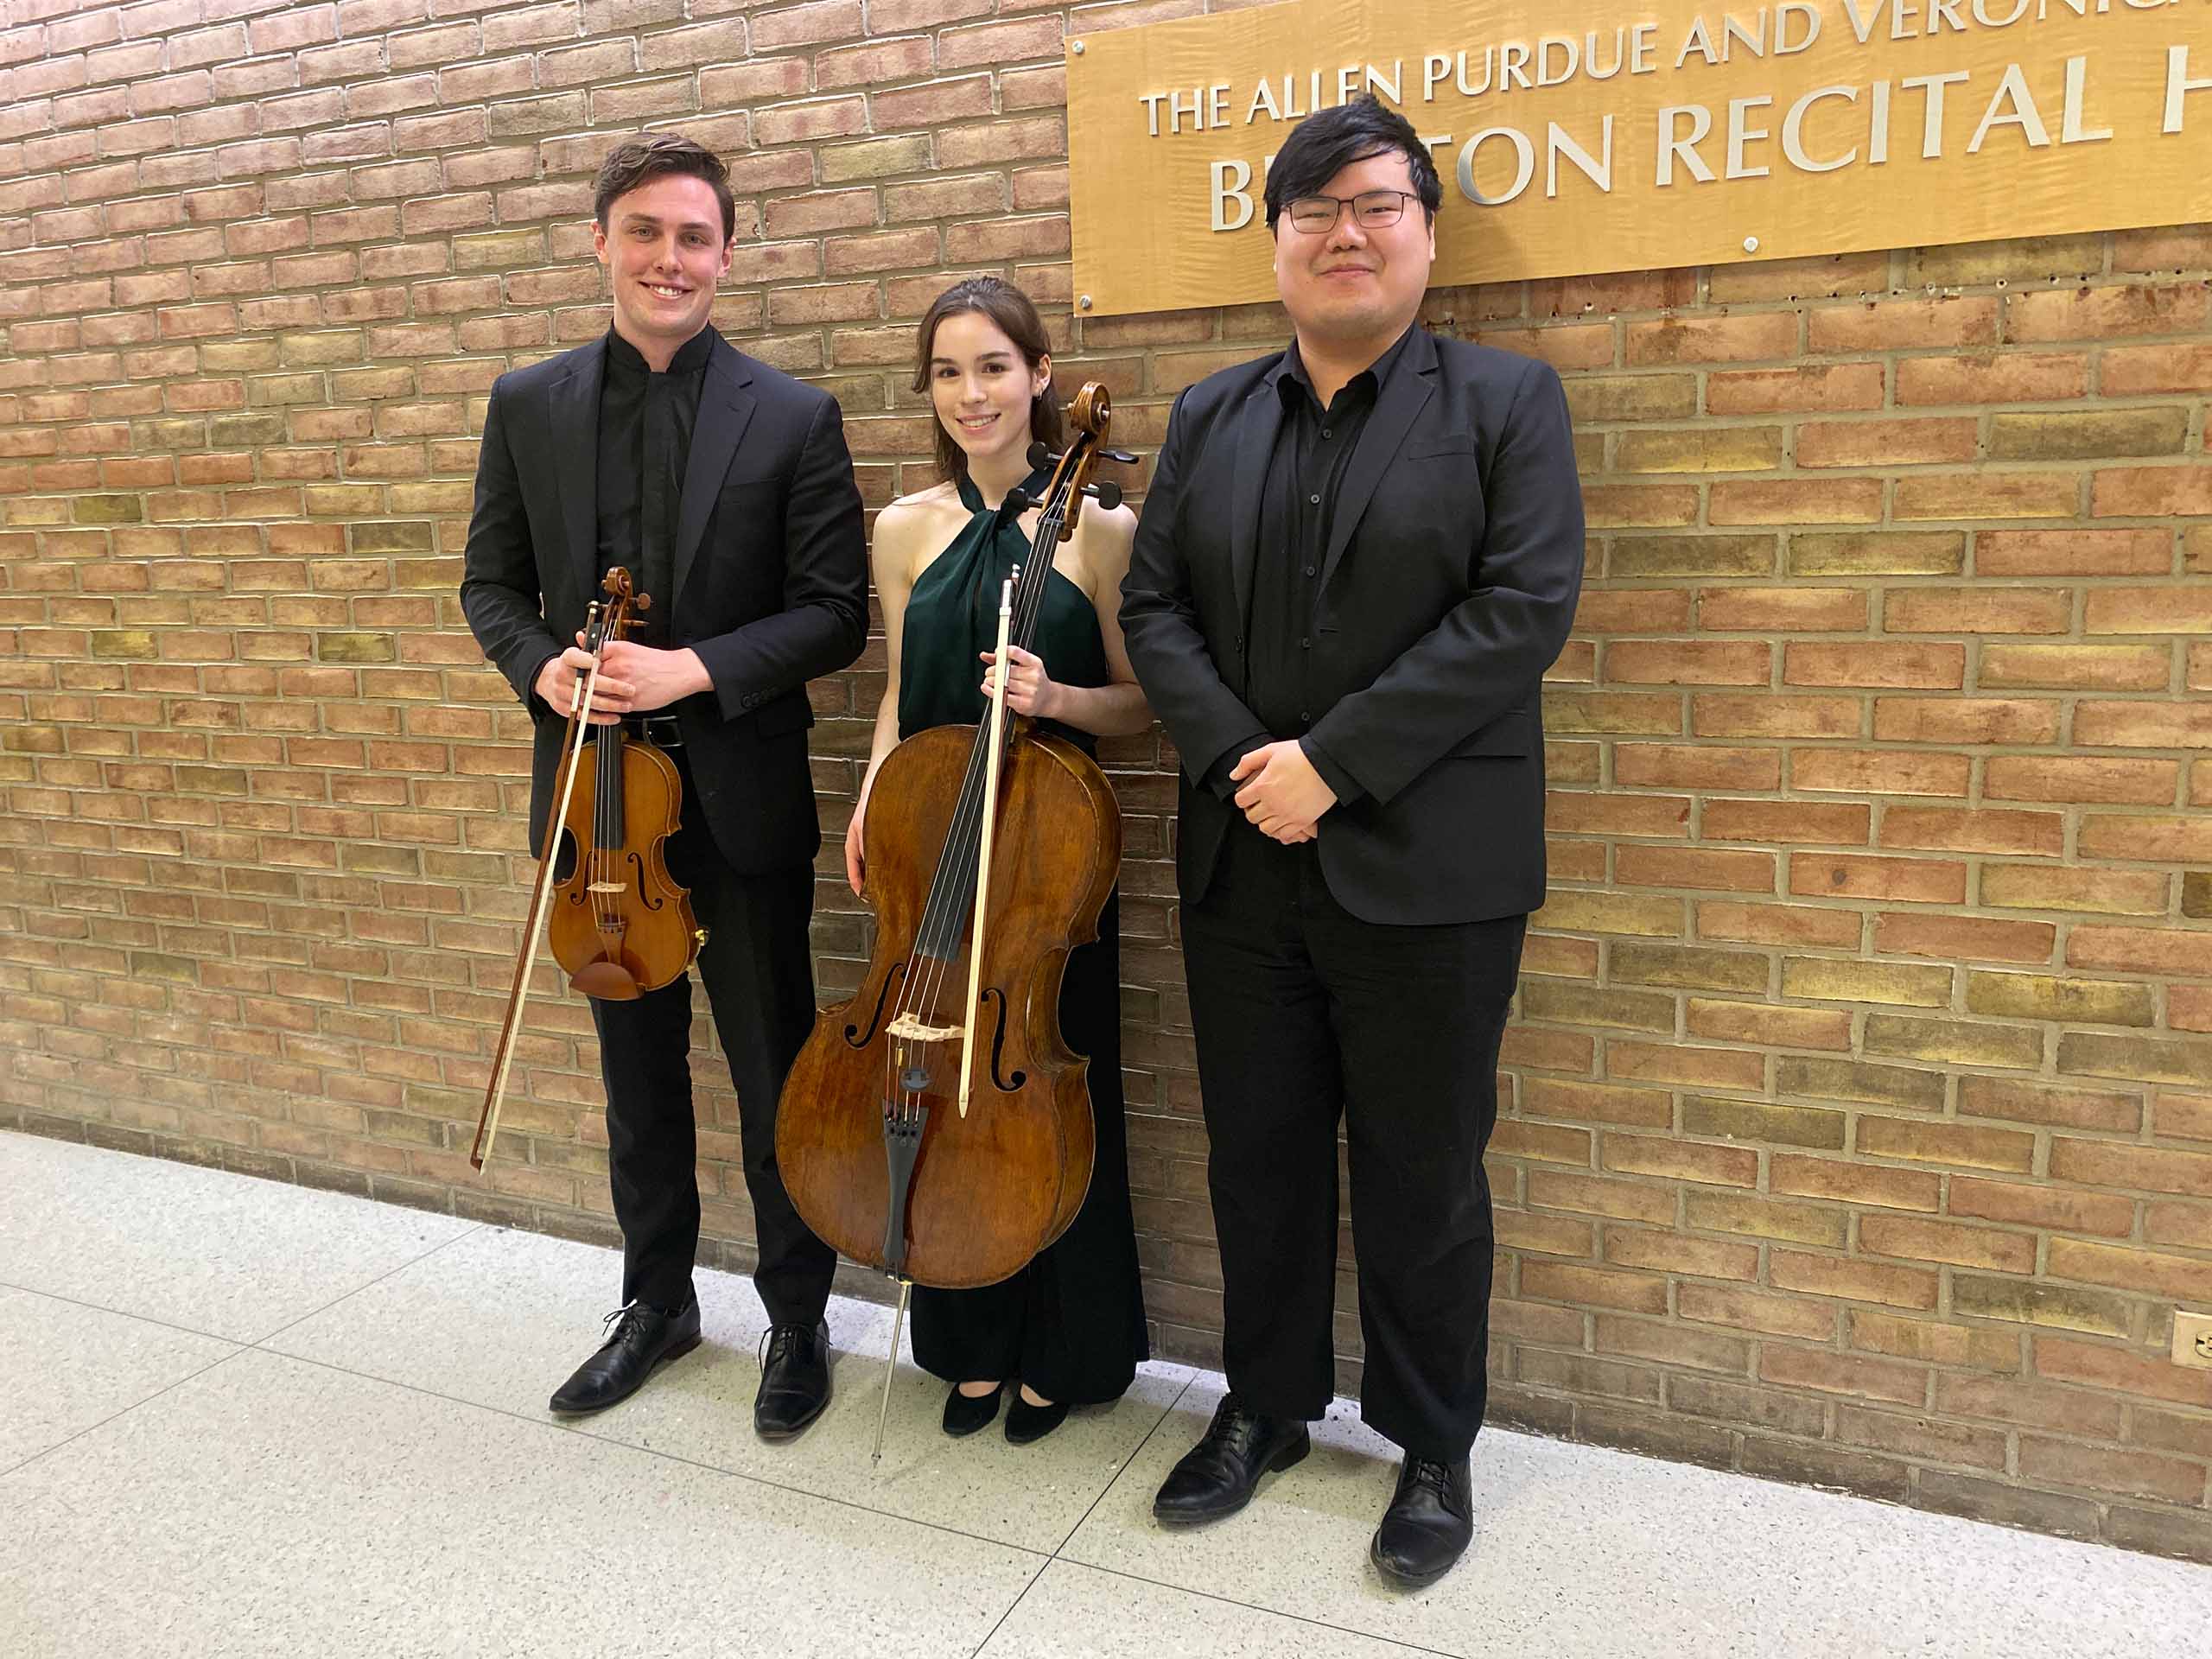 Three musicians pose standing wearing black, the first two hold a violin and a cello